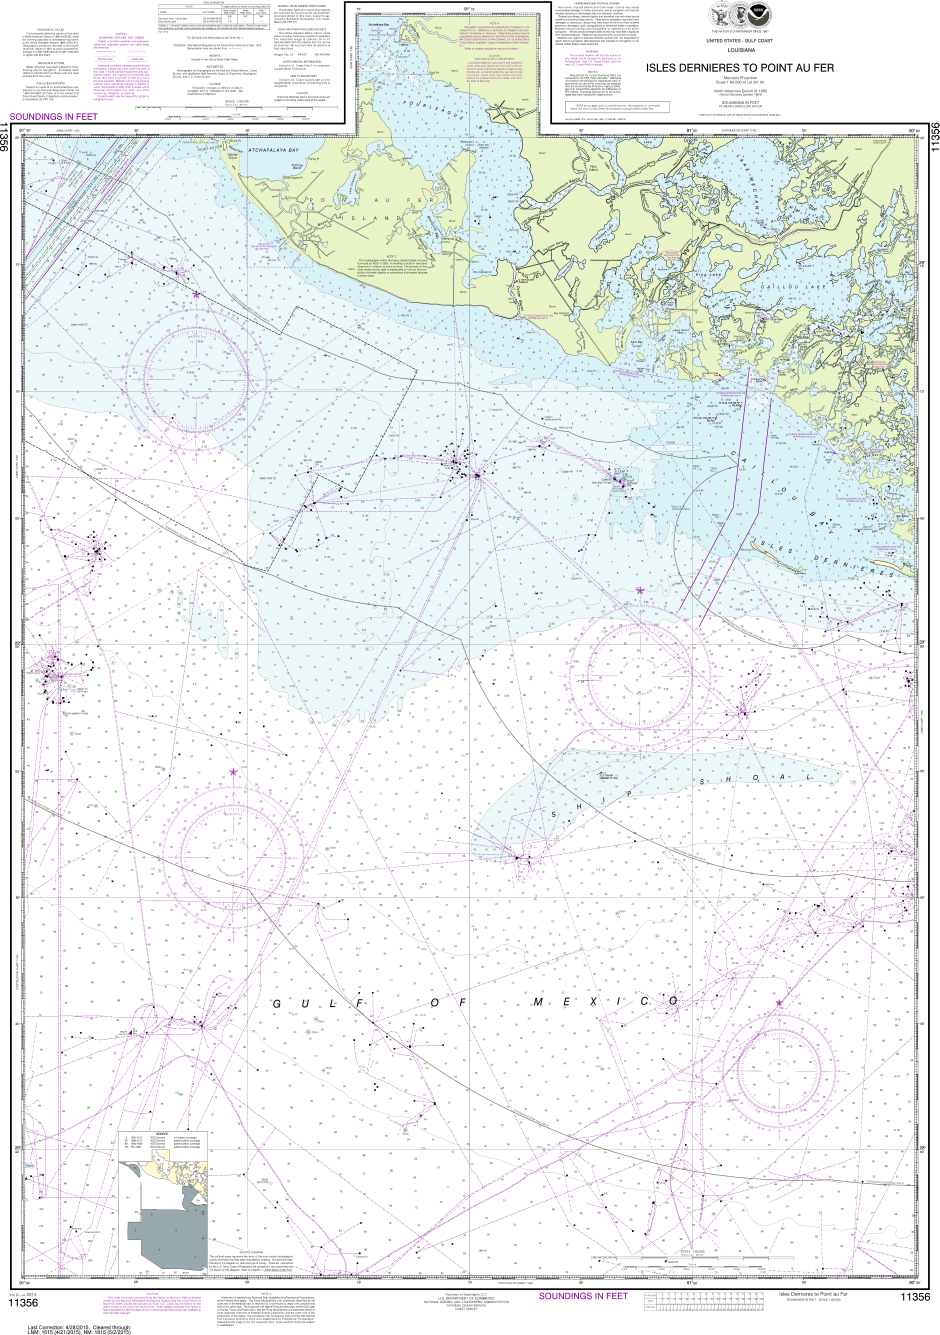 NOAA Print-on-Demand Charts US Waters-Isles Dernieres to Point au Fer-11356